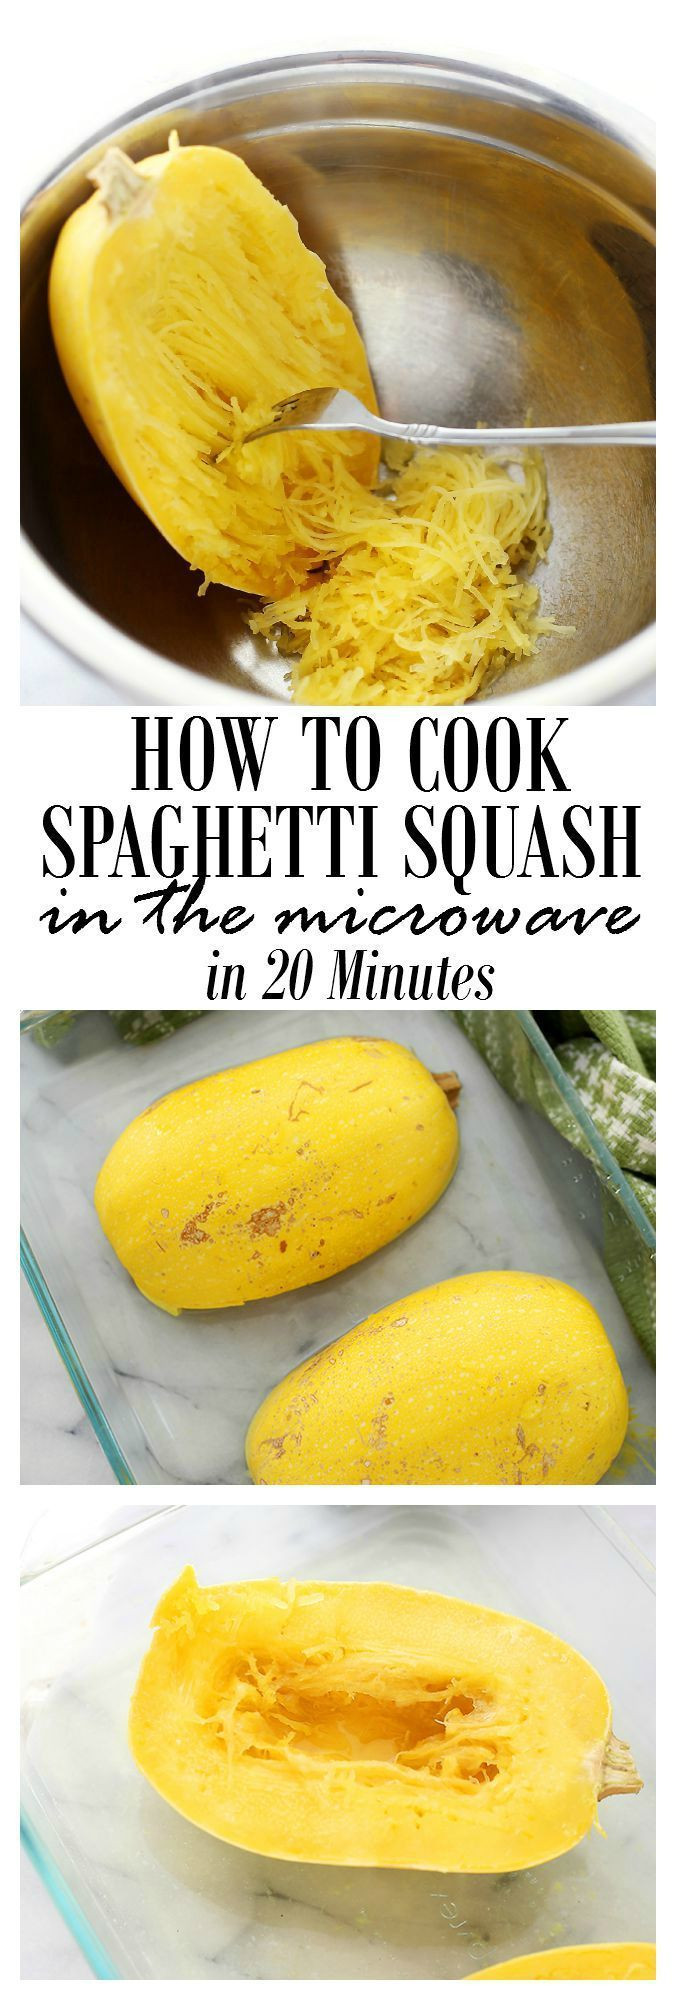 Cook Spaghetti In Microwave
 How to Cook Spaghetti Squash in the Microwave